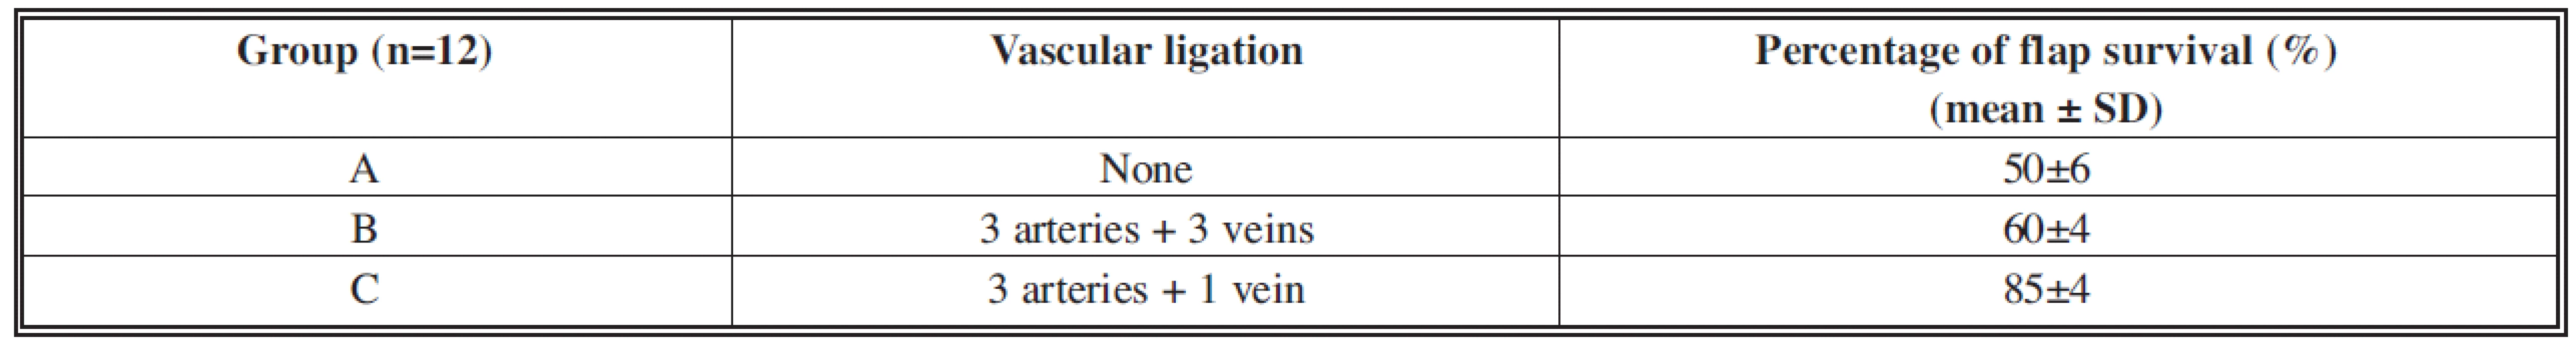 Flap survival rates depending on the type of vascular delay in the three groups of animals